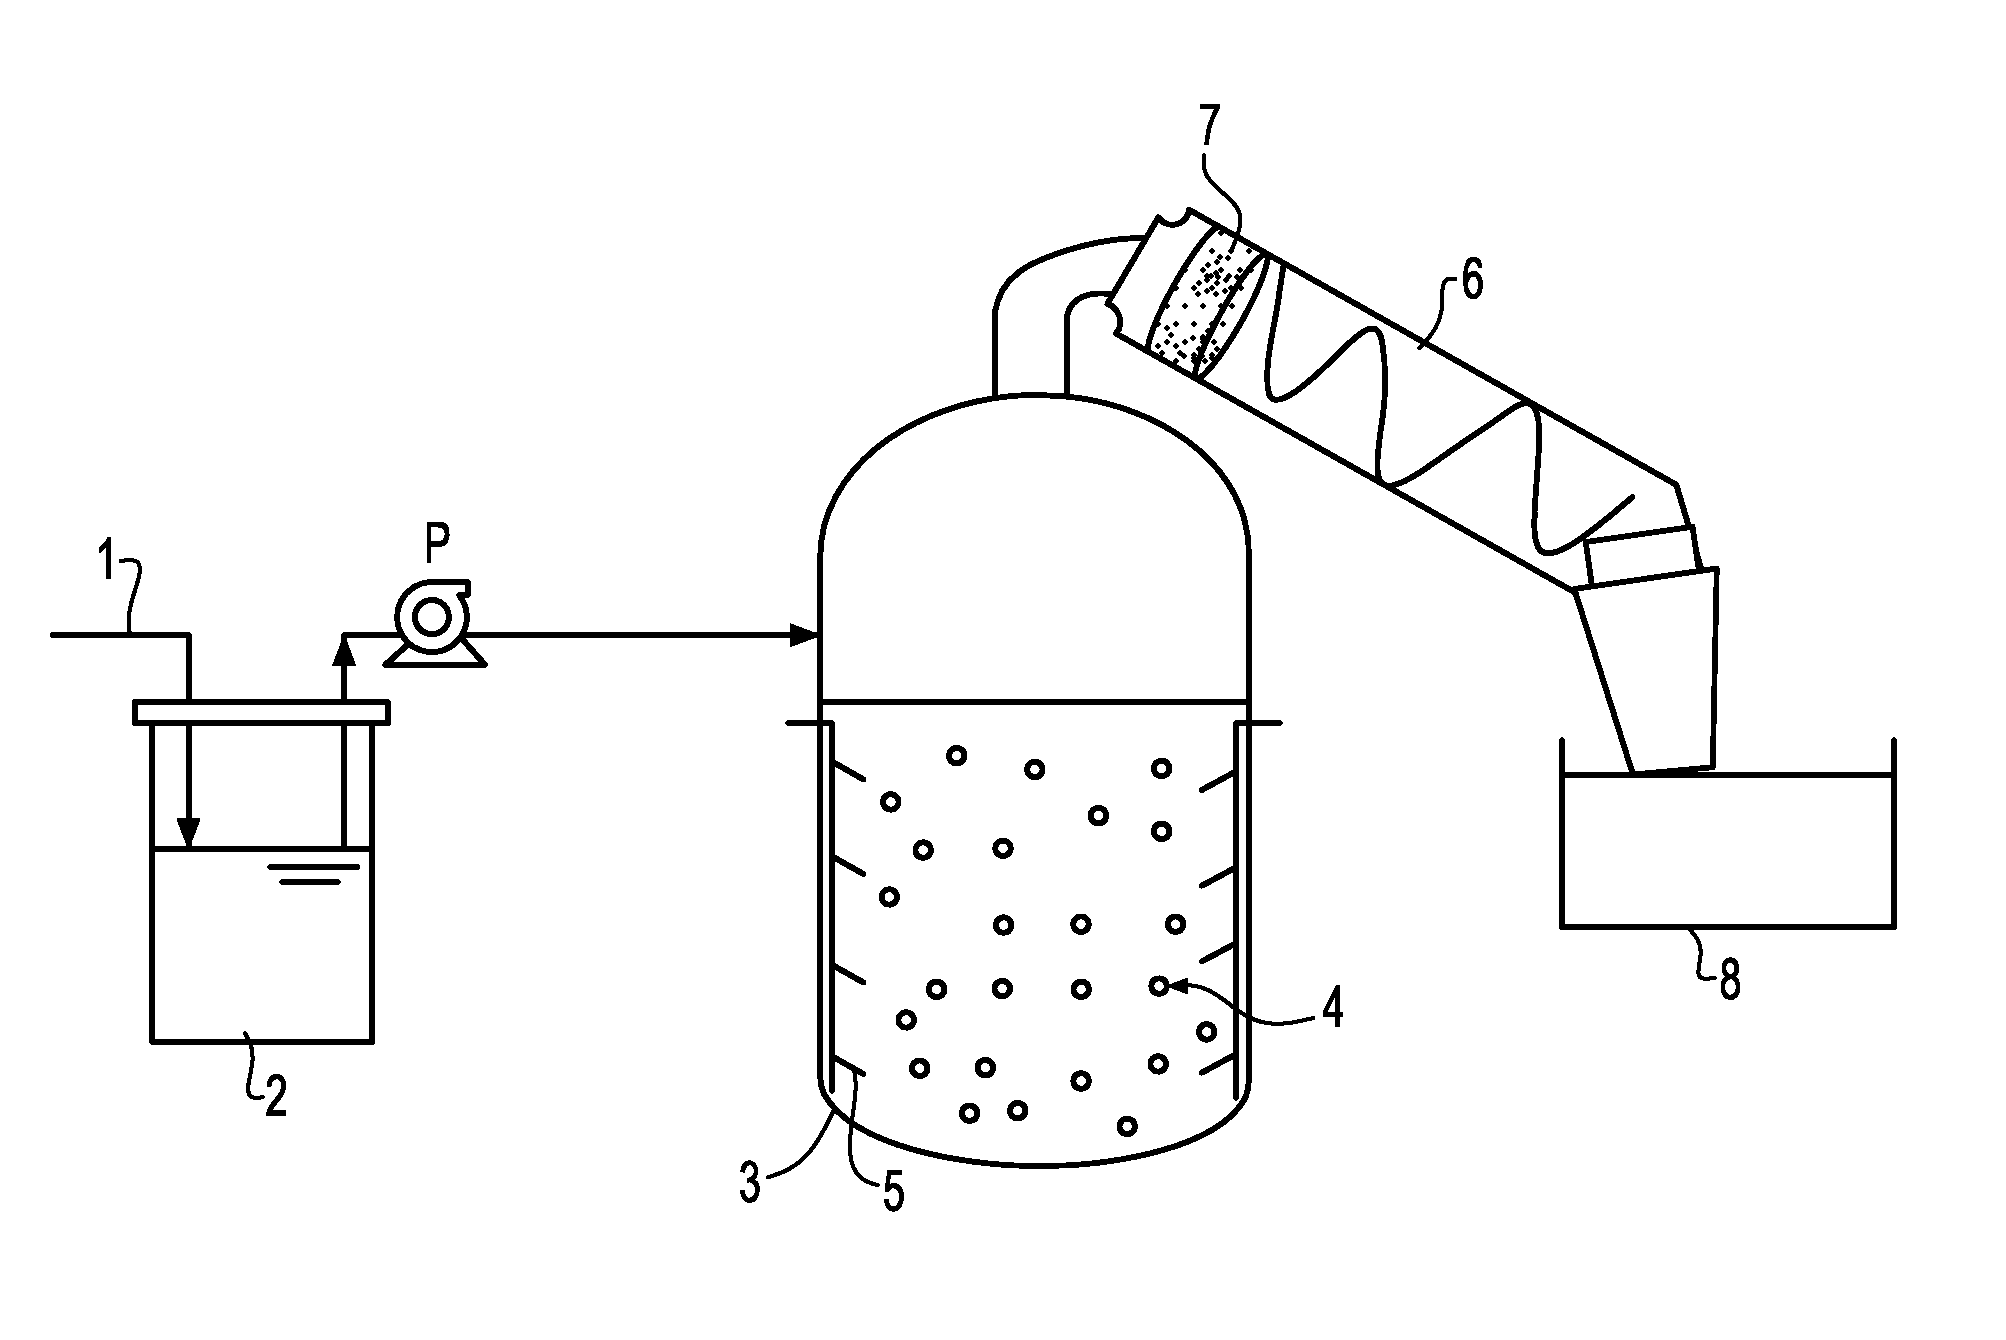 Method for sewage and industrial wastewater treatment